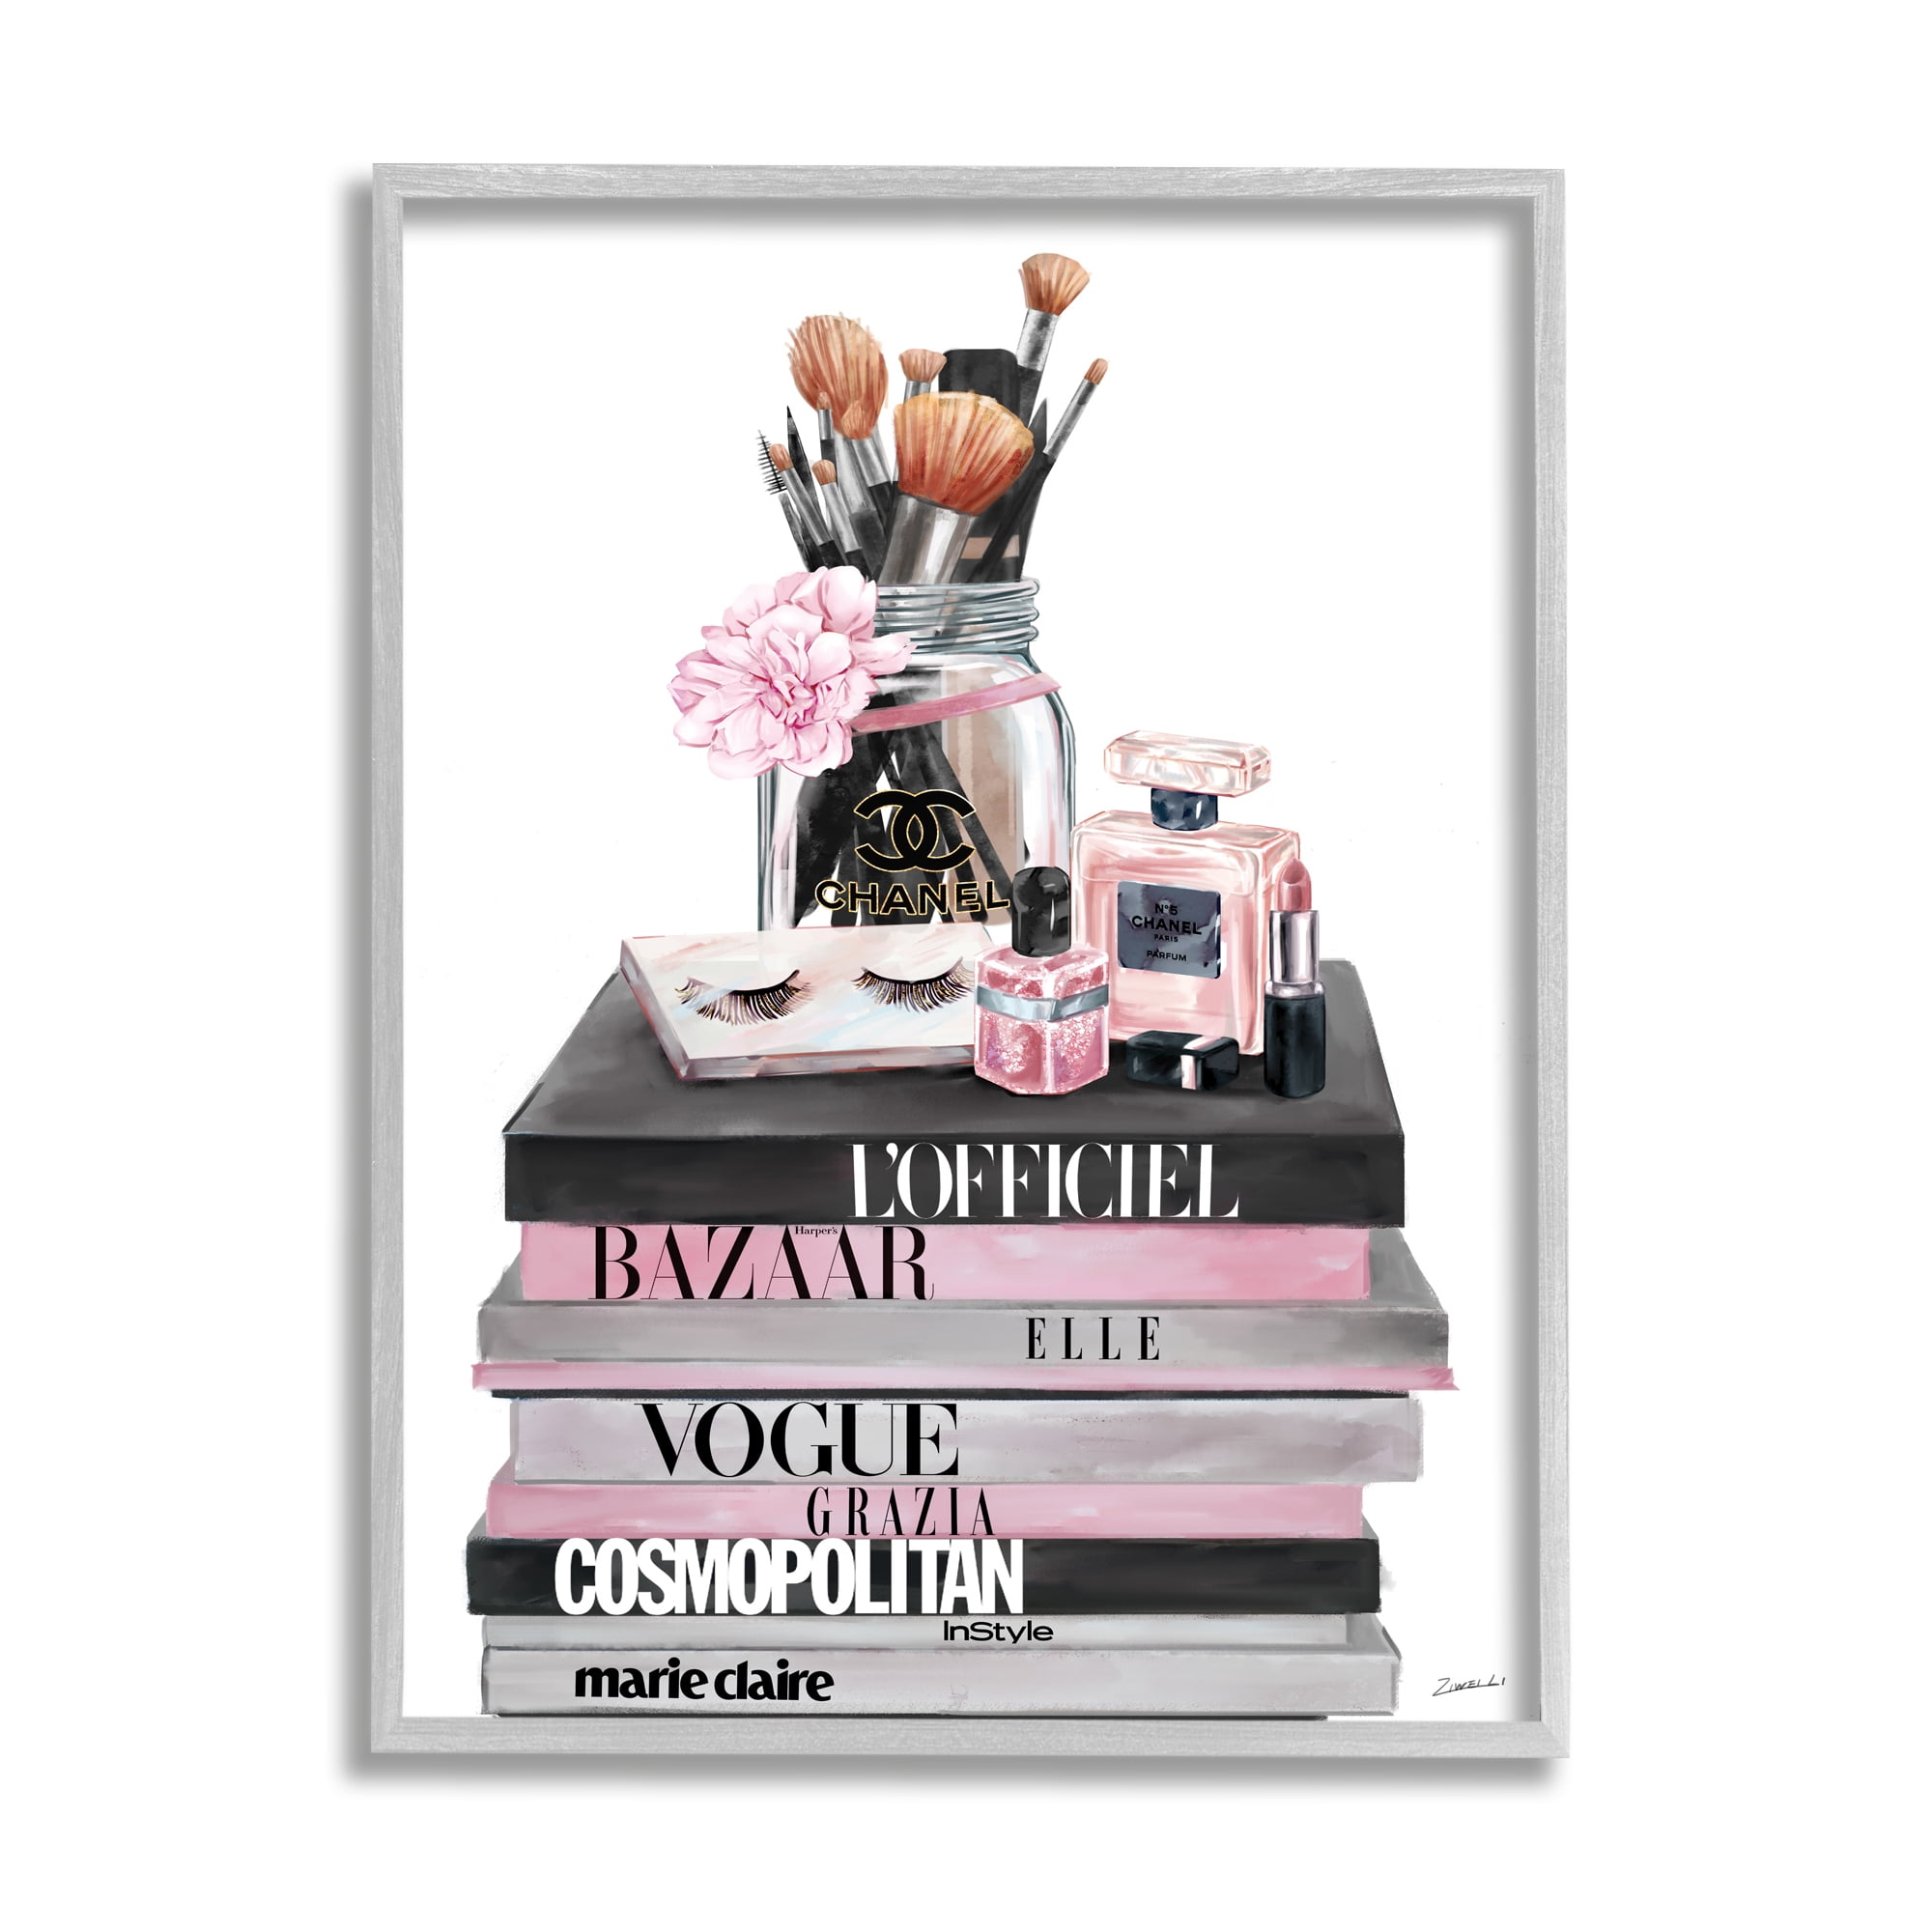 Fashion Accessories Glam Magazine Book Stack 11 in x 14 in Framed Painting Art Prints, by Stupell Home dcor